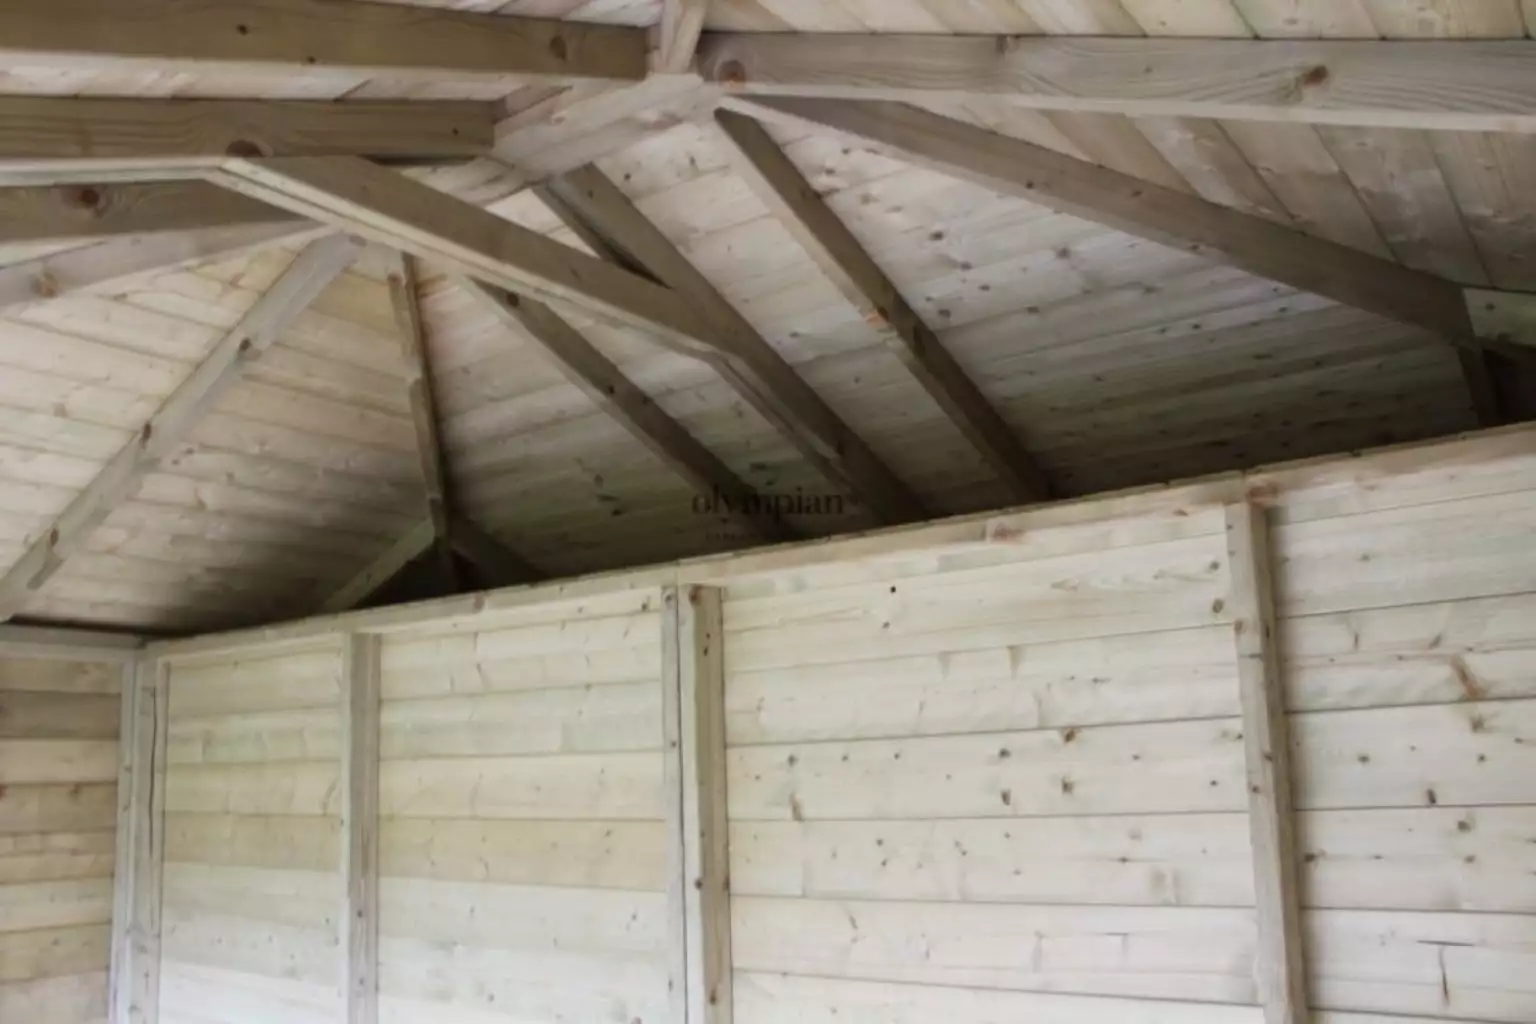 internal view of hipped roof summerhouse